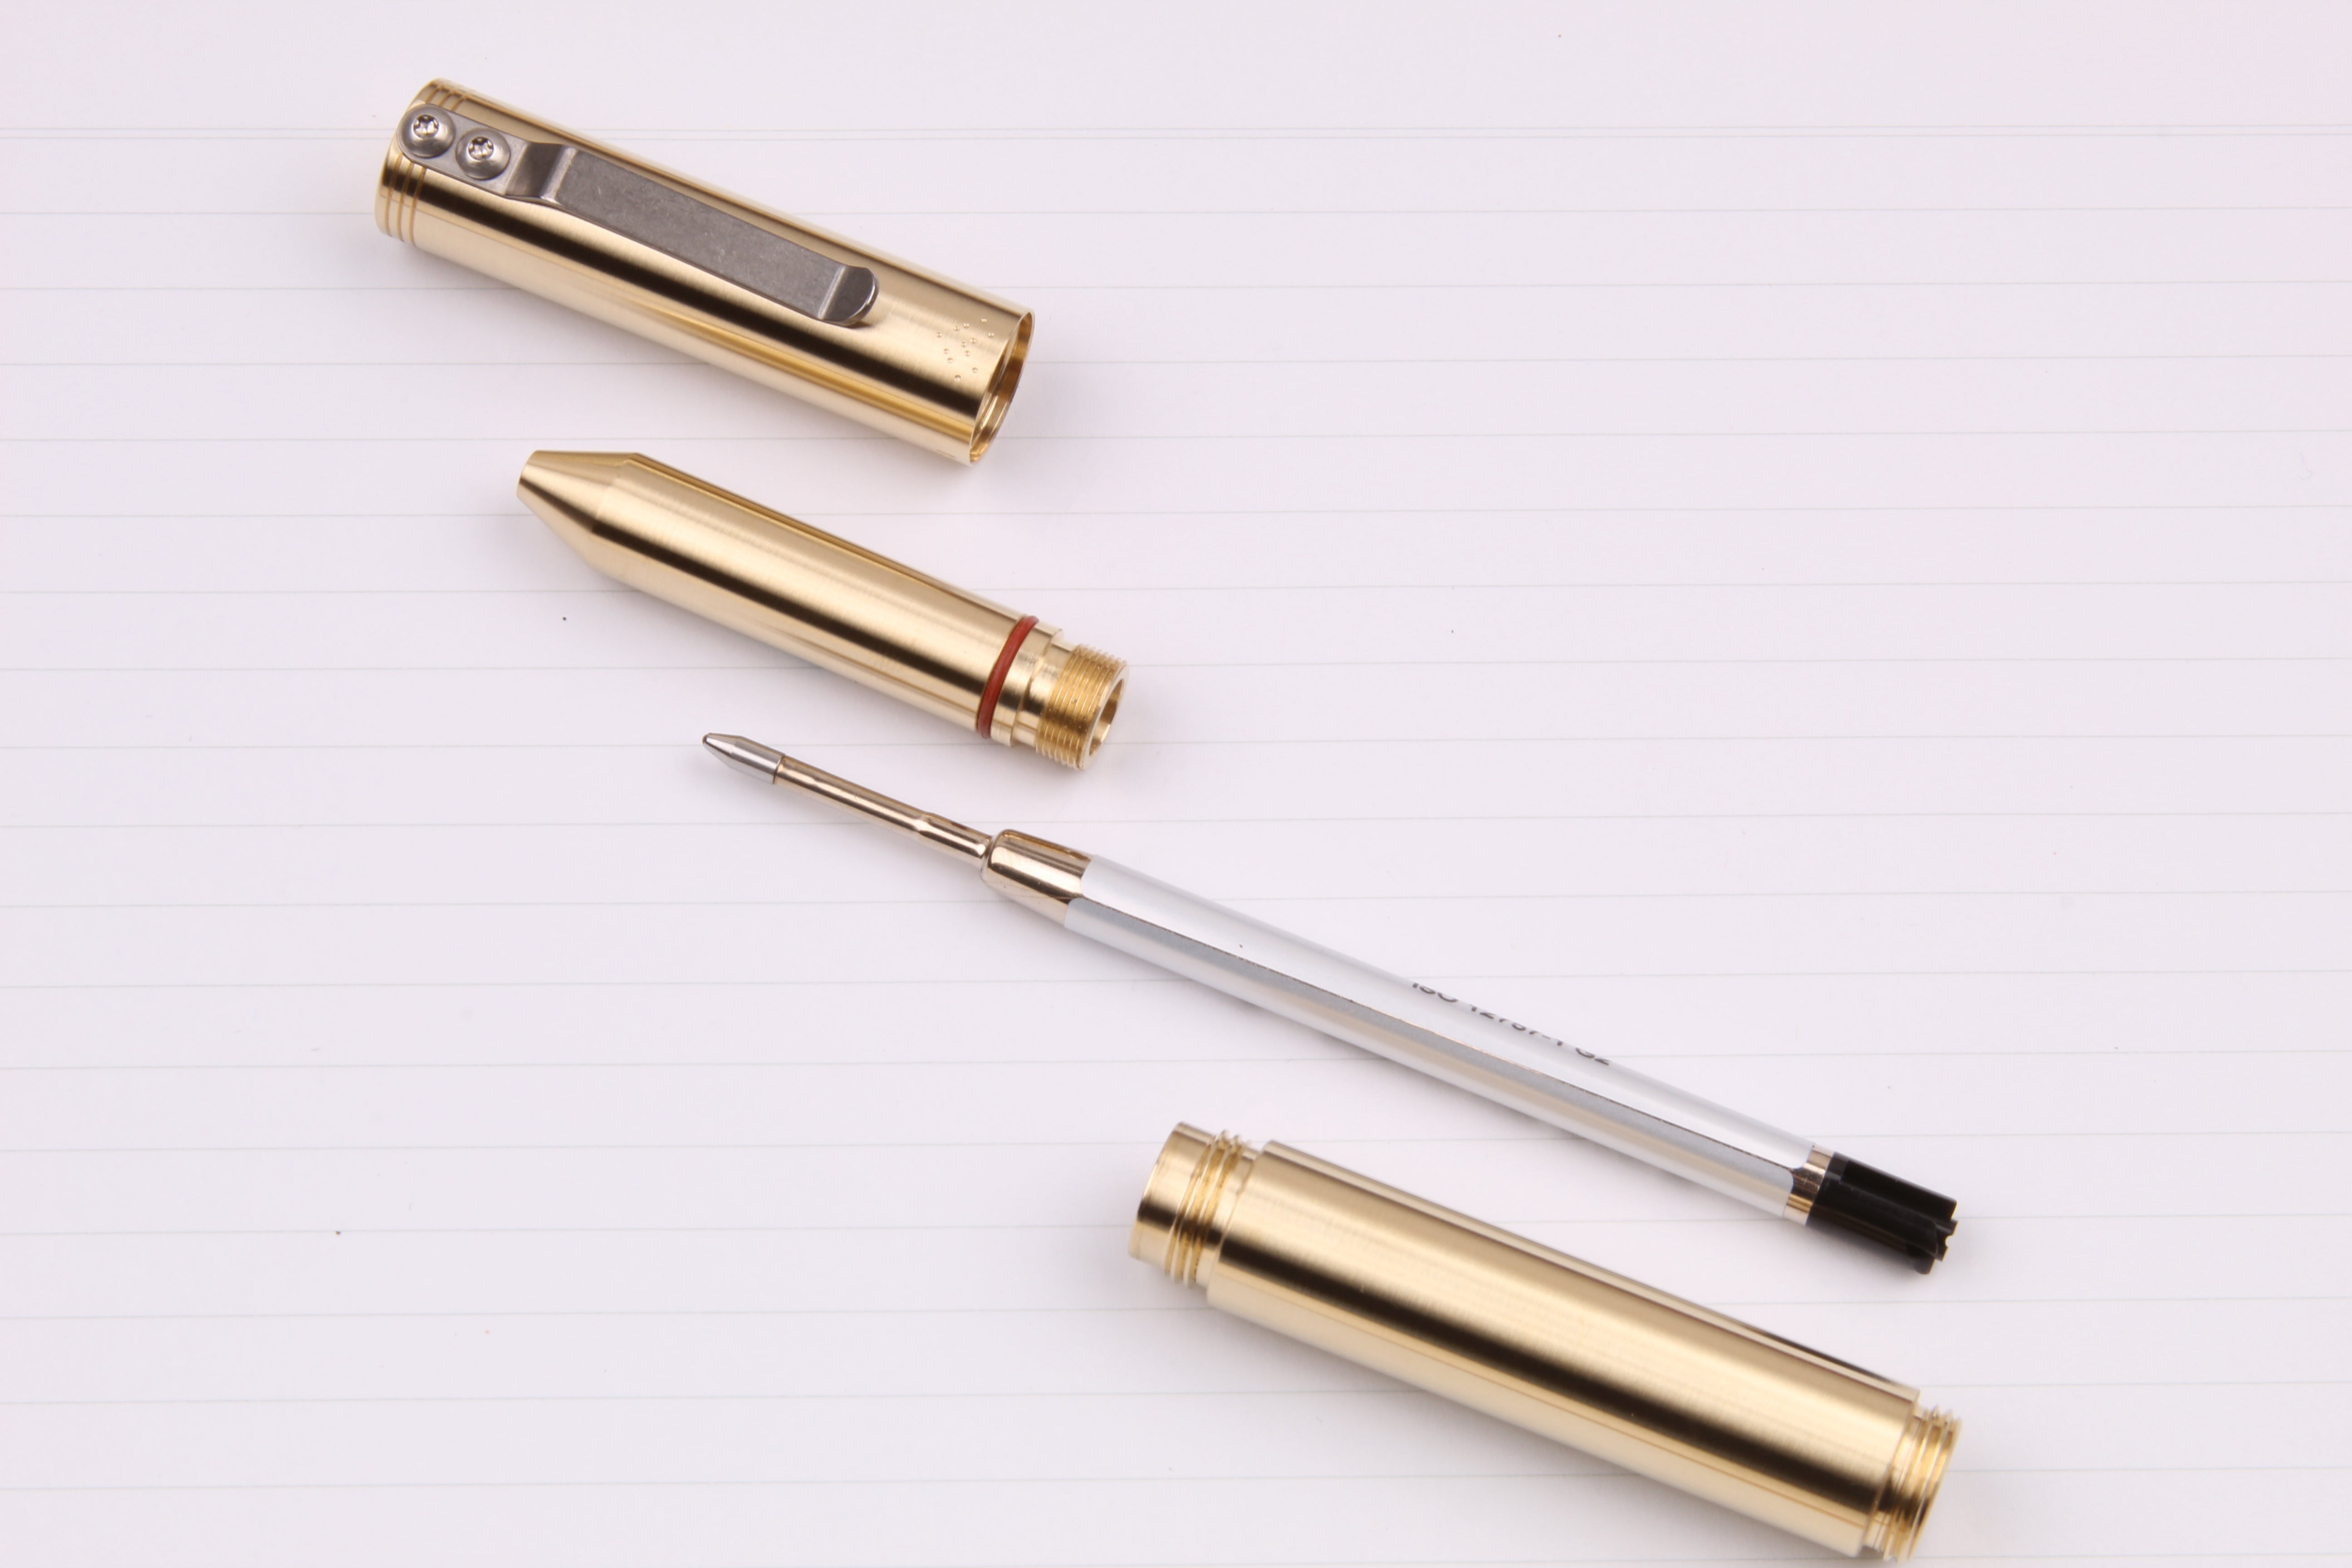 The Machined Pen V2 - The Anniversary Edition